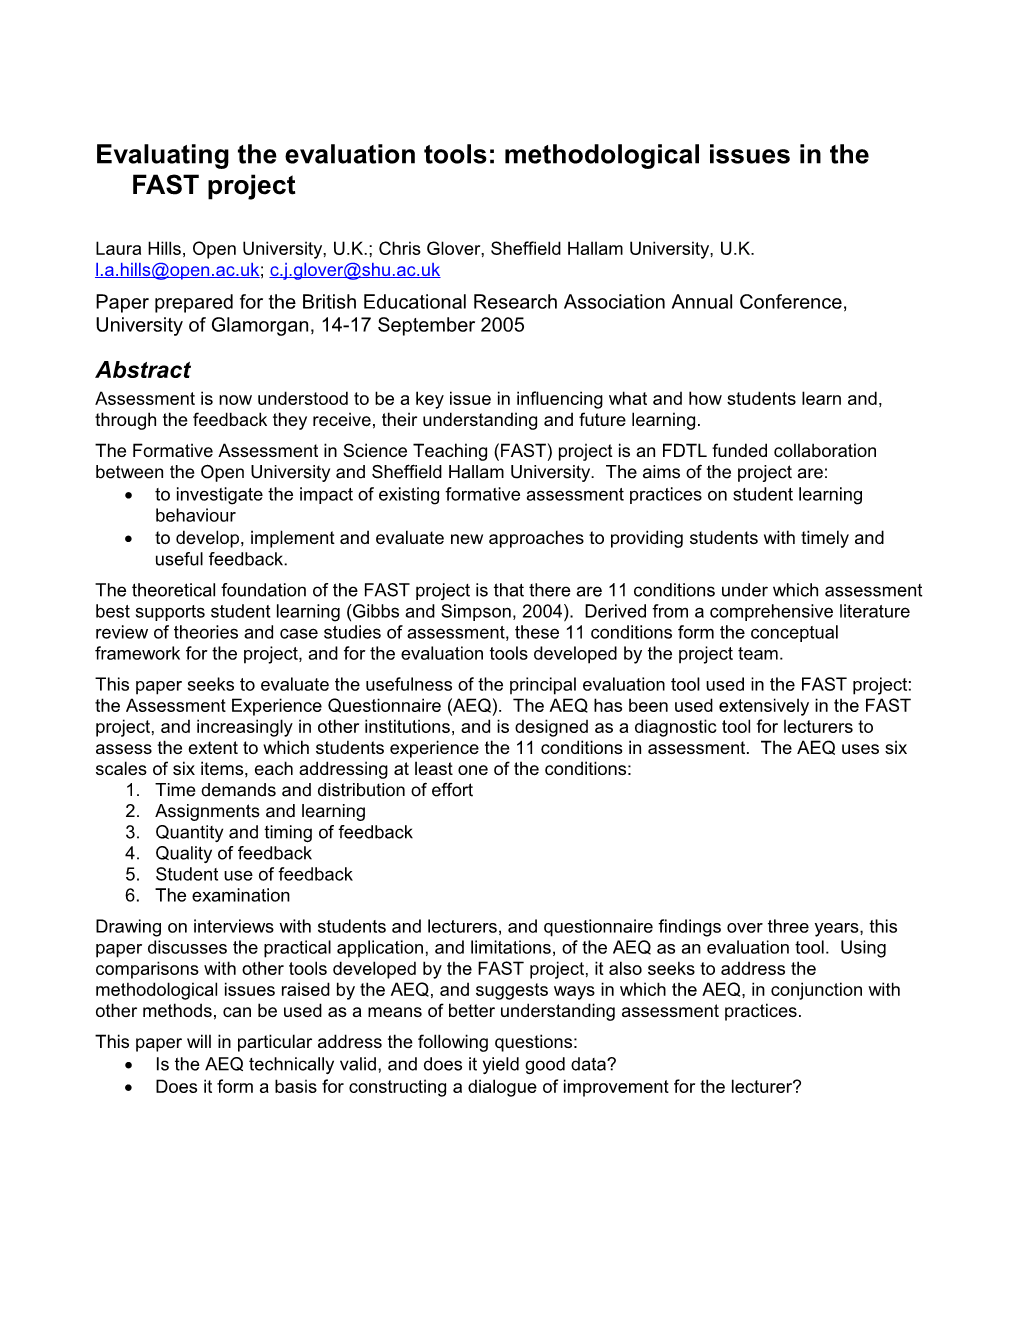 Evaluating the Evaluation Tools: Methodological Issues in the FAST Project